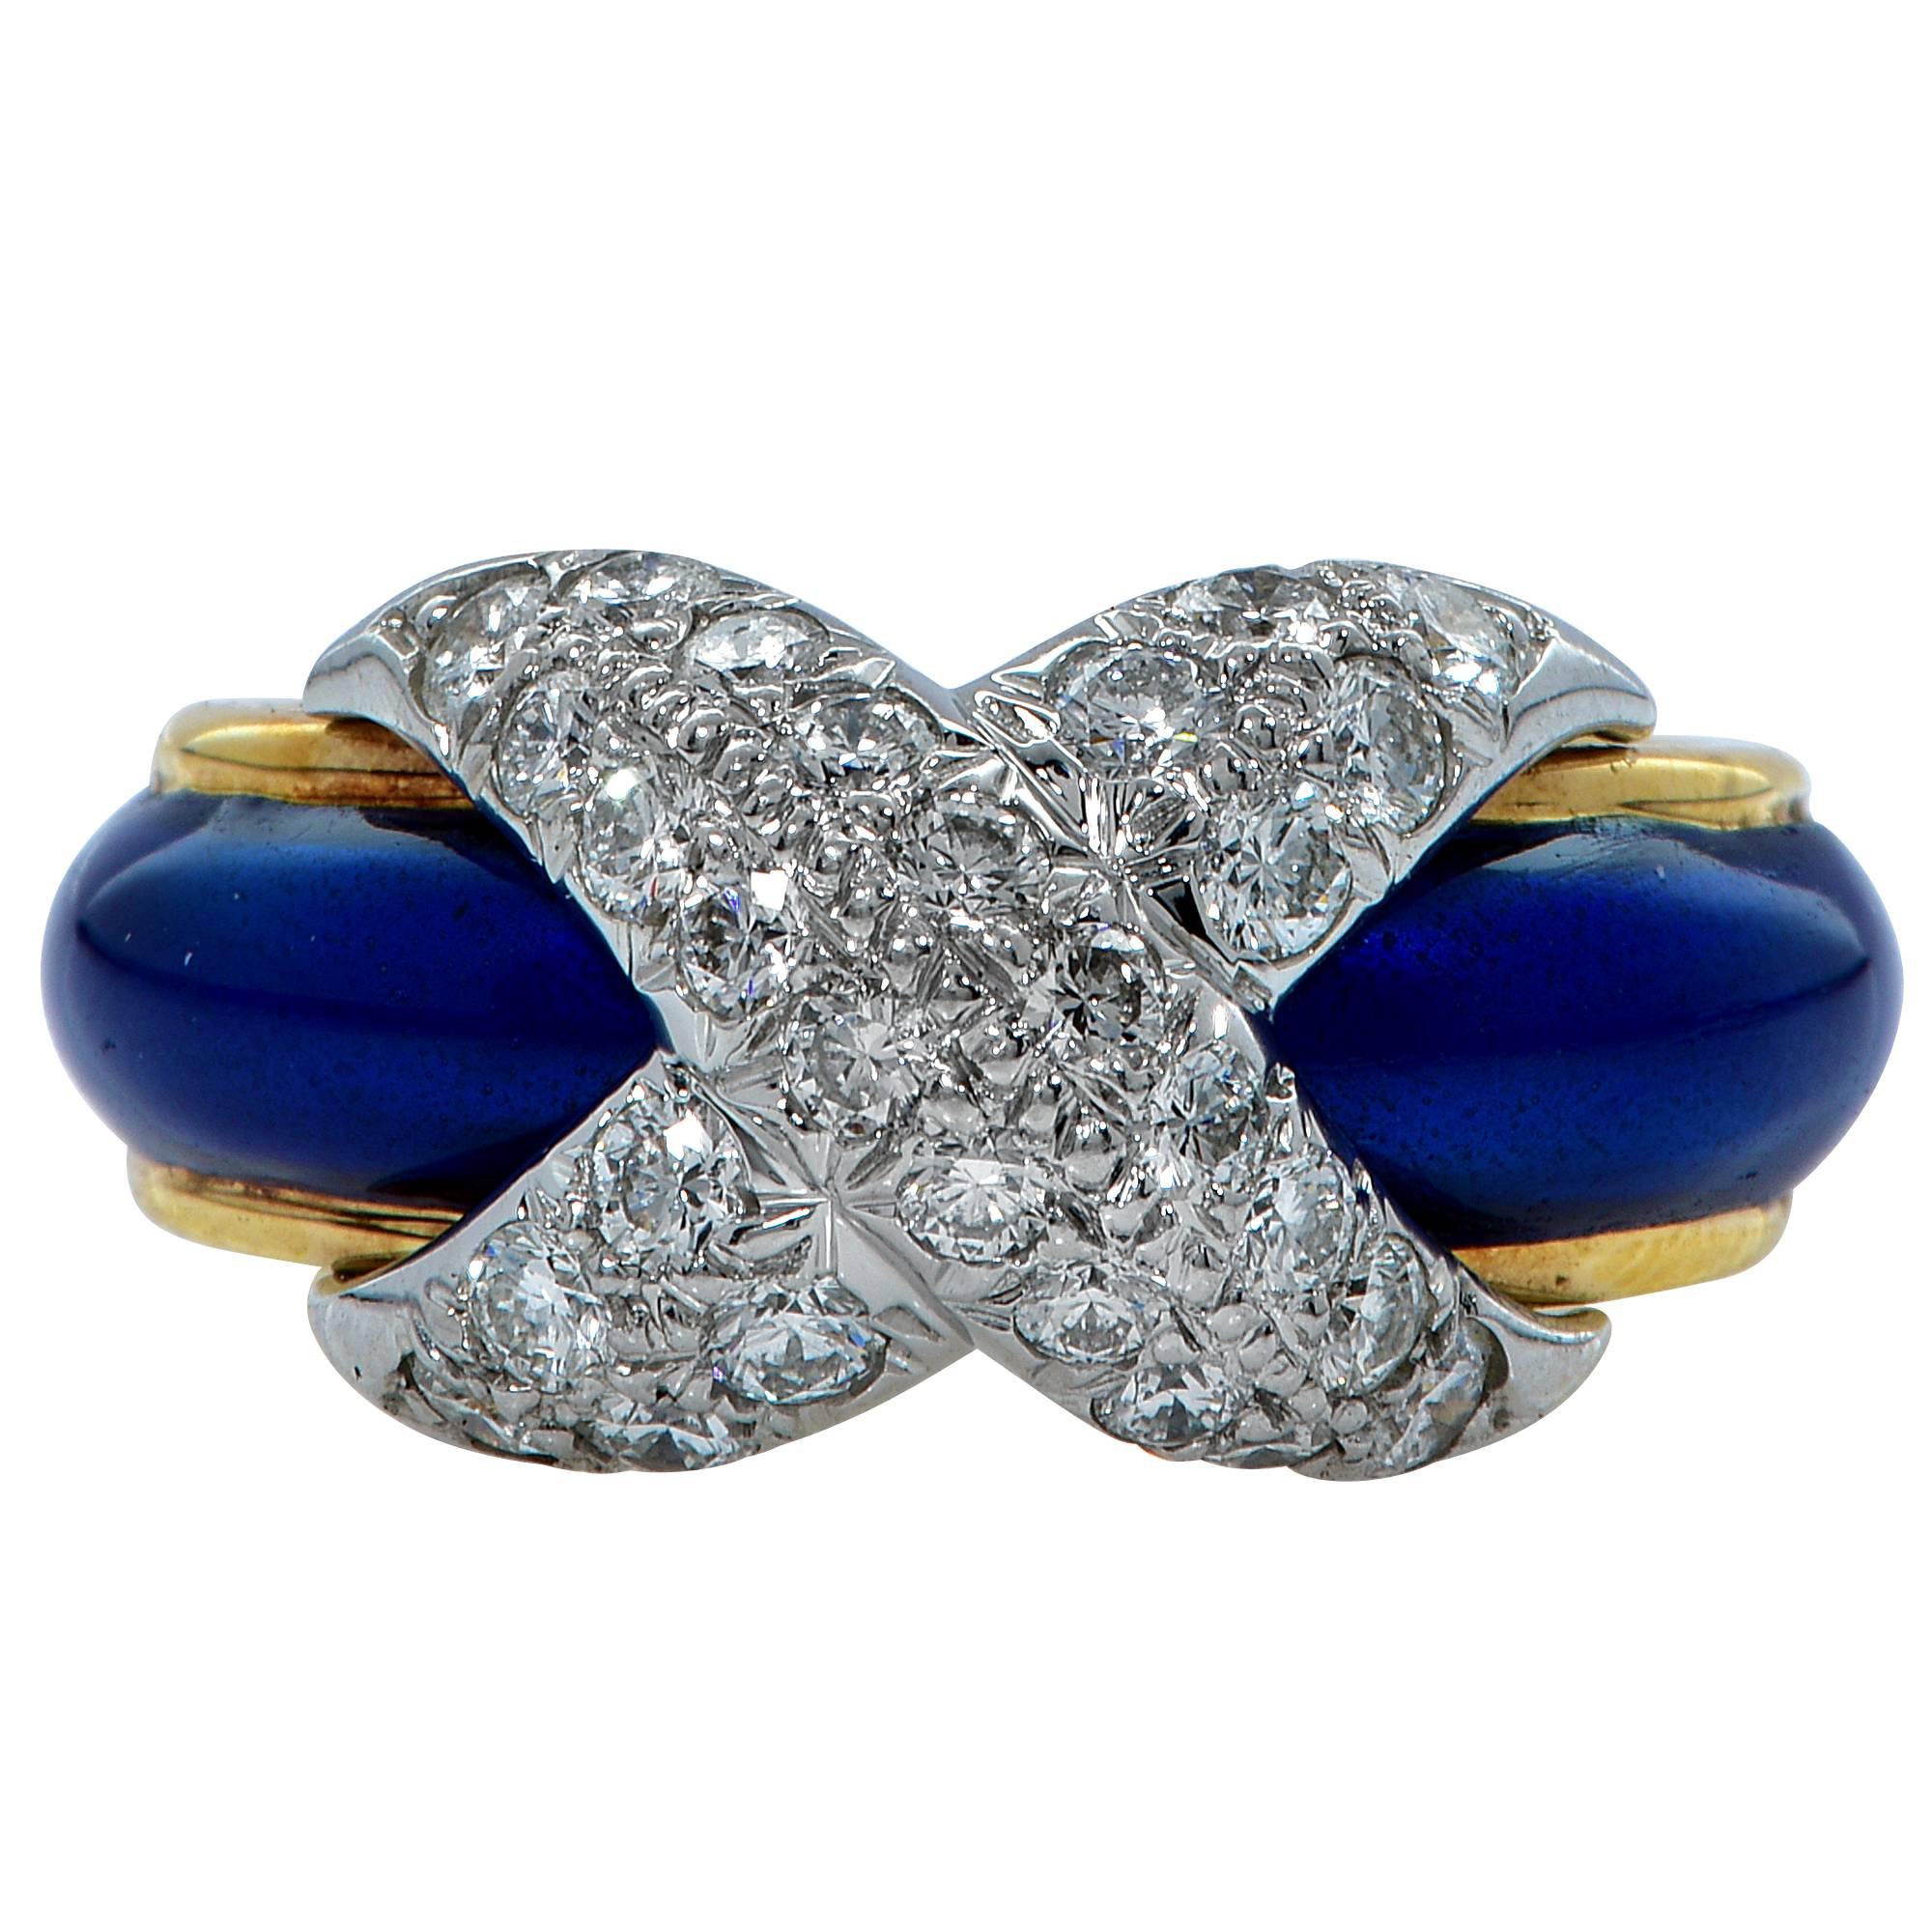 Tiffany & Co. Schlumberger X ring containing 28 round brilliant cut diamonds forming an X across the top of the ring and weighing approximately 1ct total, G-H color and VS clarity. The ring is further accented by a vibrant blue enamel band.

The